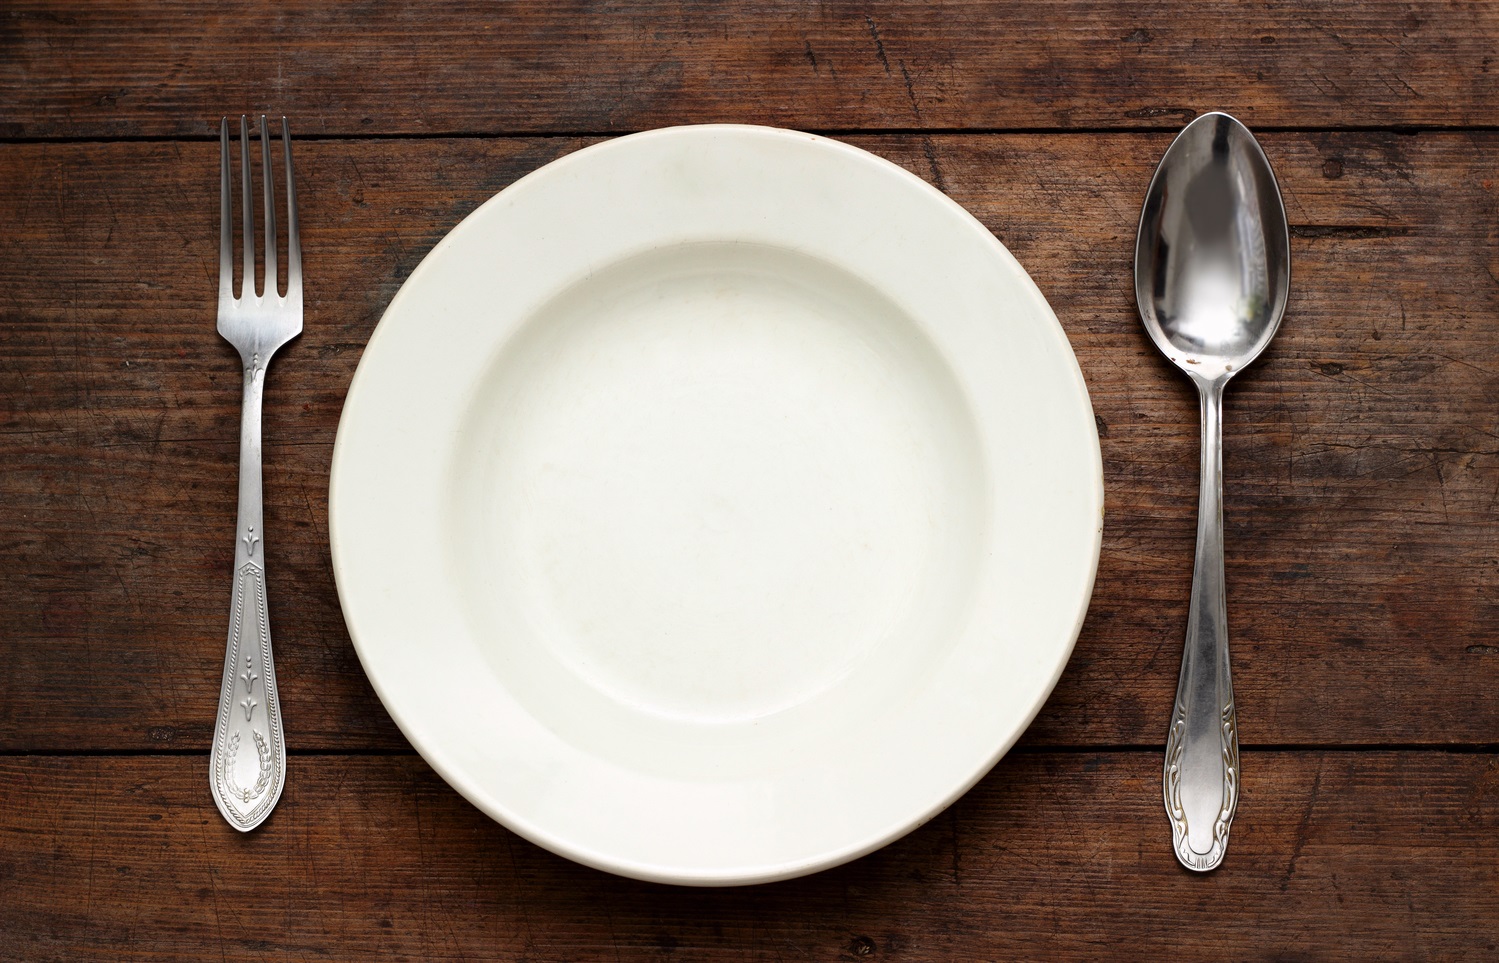 Image showing an empty plate to symbolize the effects of fasting